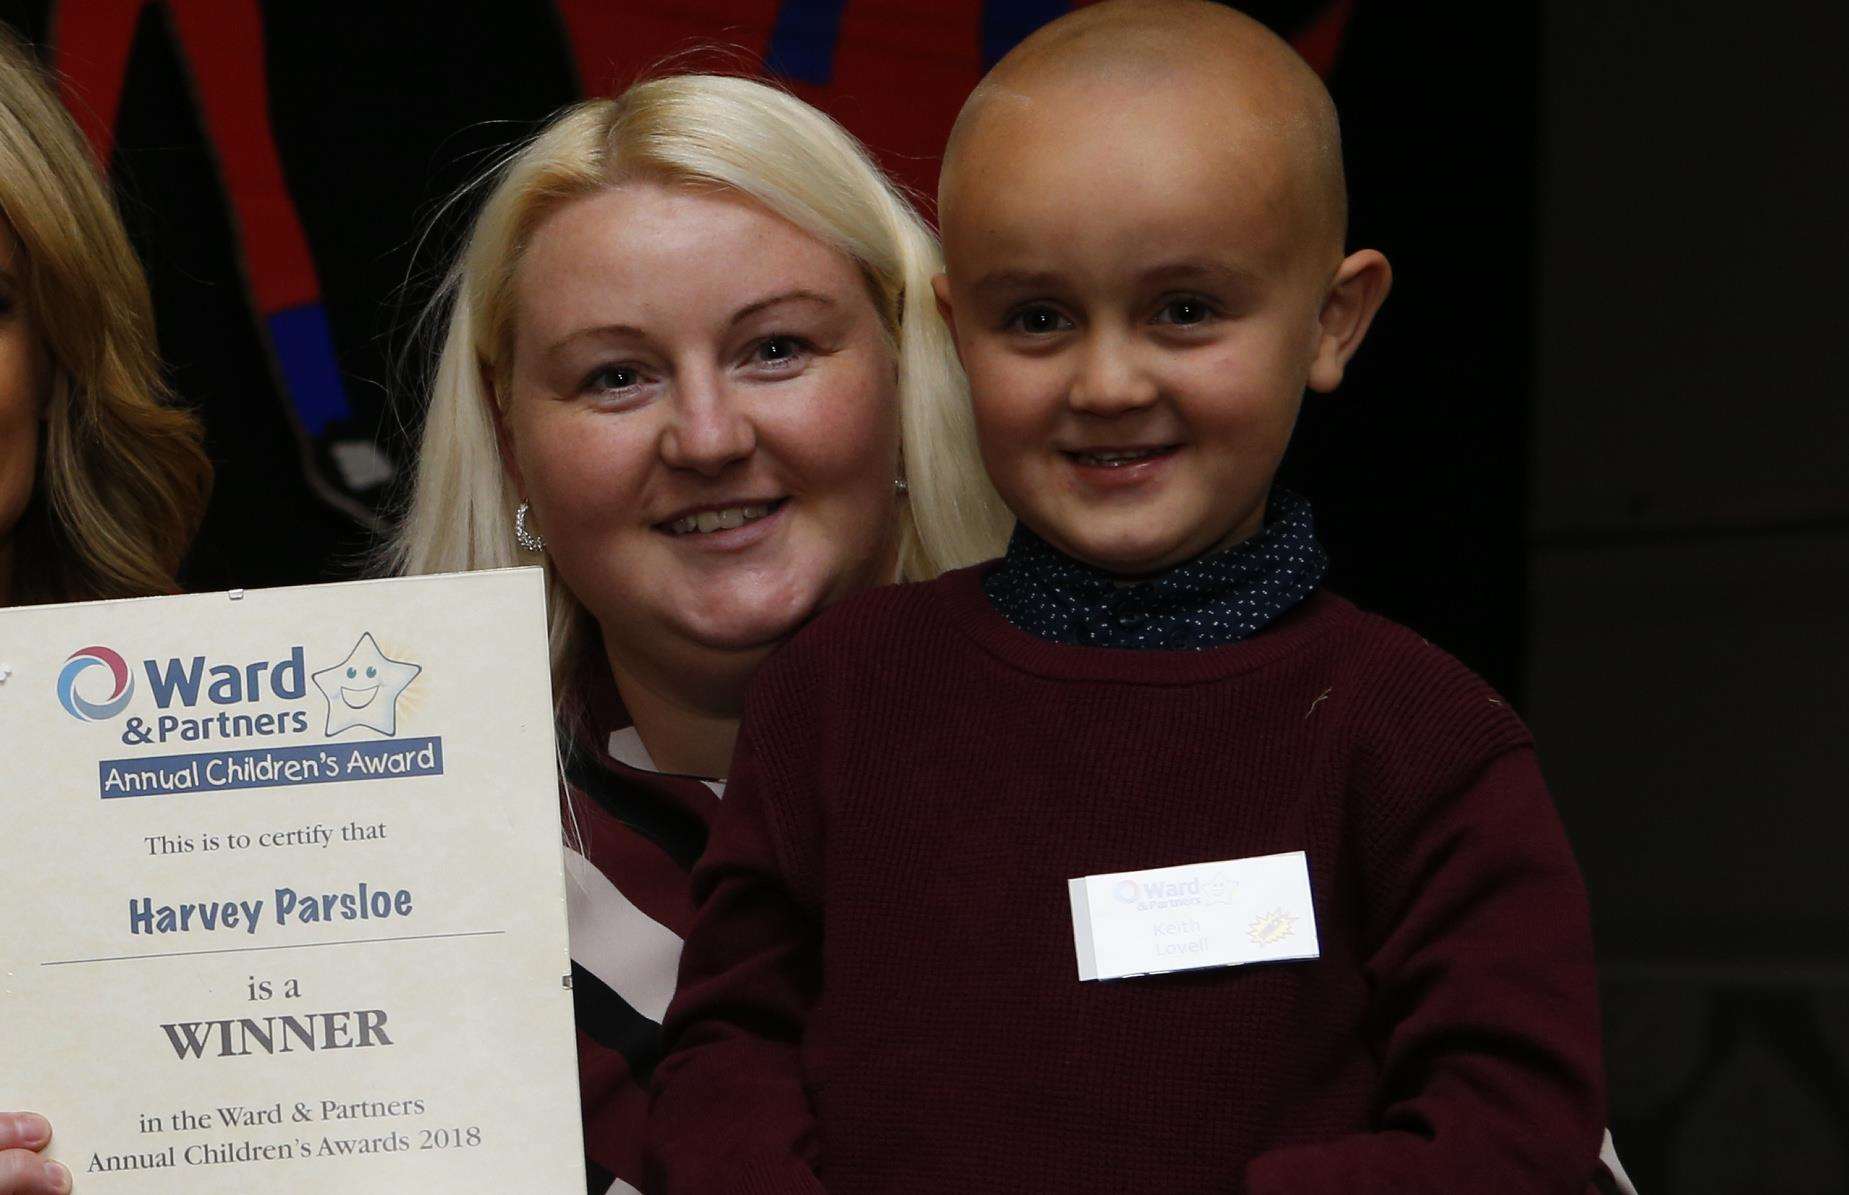 Brave & Courageous Child award was given to Harvey Parsole